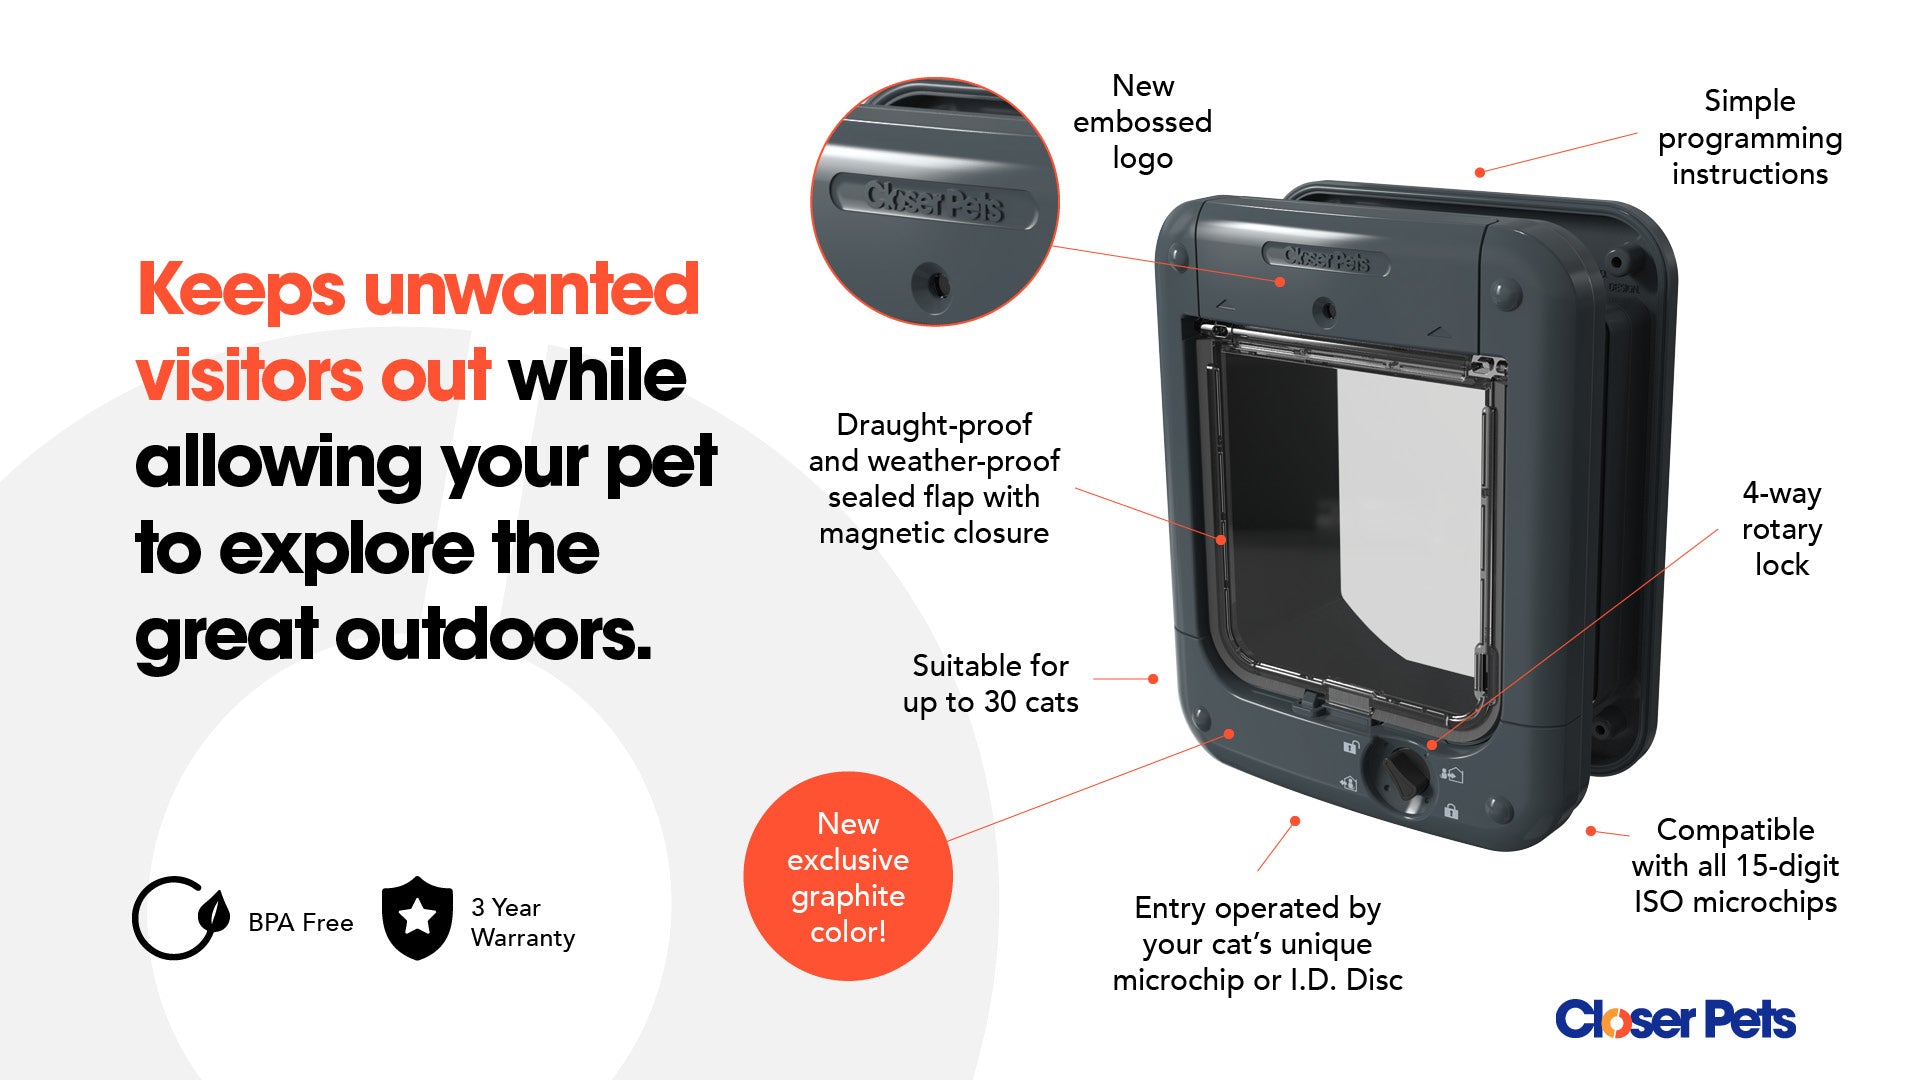 Closer Pets Microchip Activated Weatherproof Flap / Door with Manual Lock – Anthracite Dark Grey (CP360G)